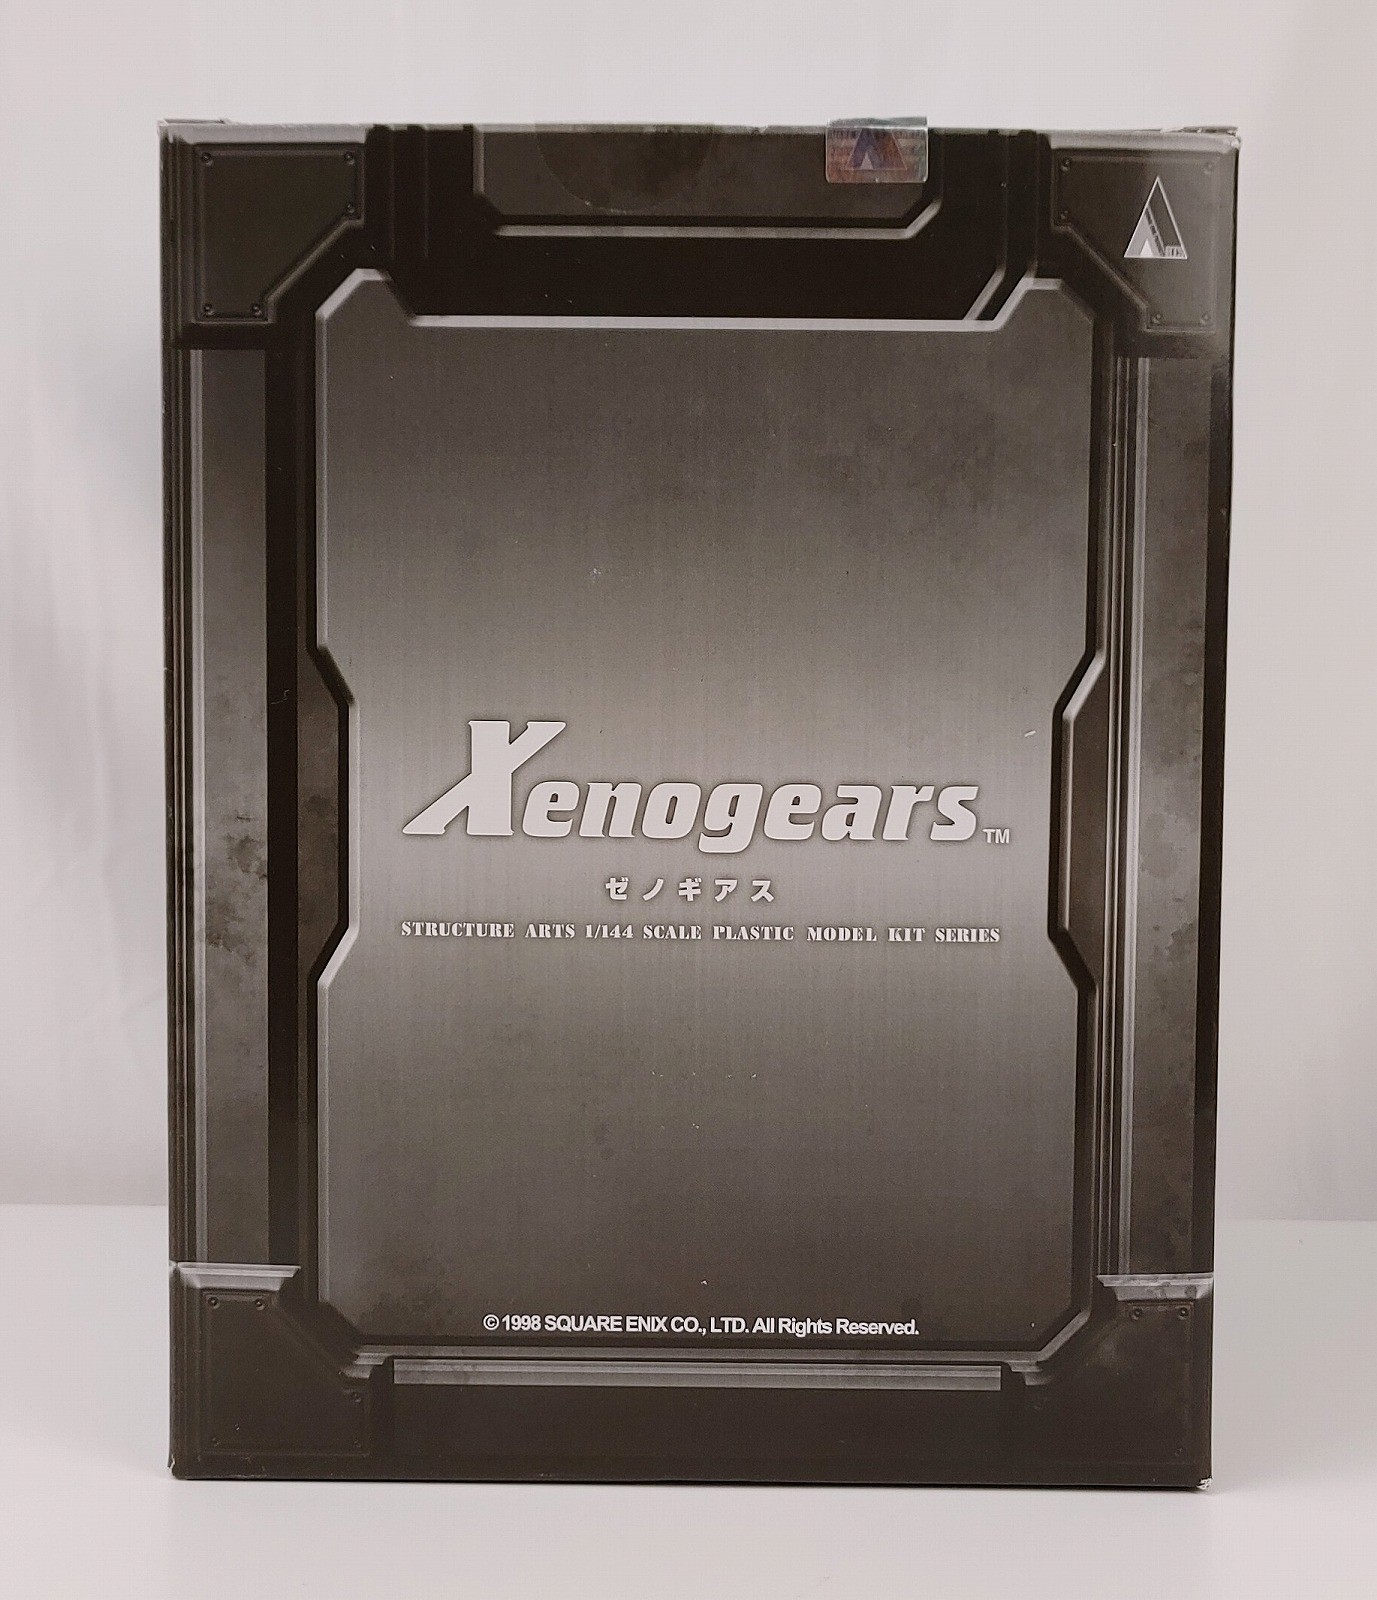 Square Xenogears Structure Arts 1/144 Scale Plastic Model Kit Series Vol.1 All 4 types BOX